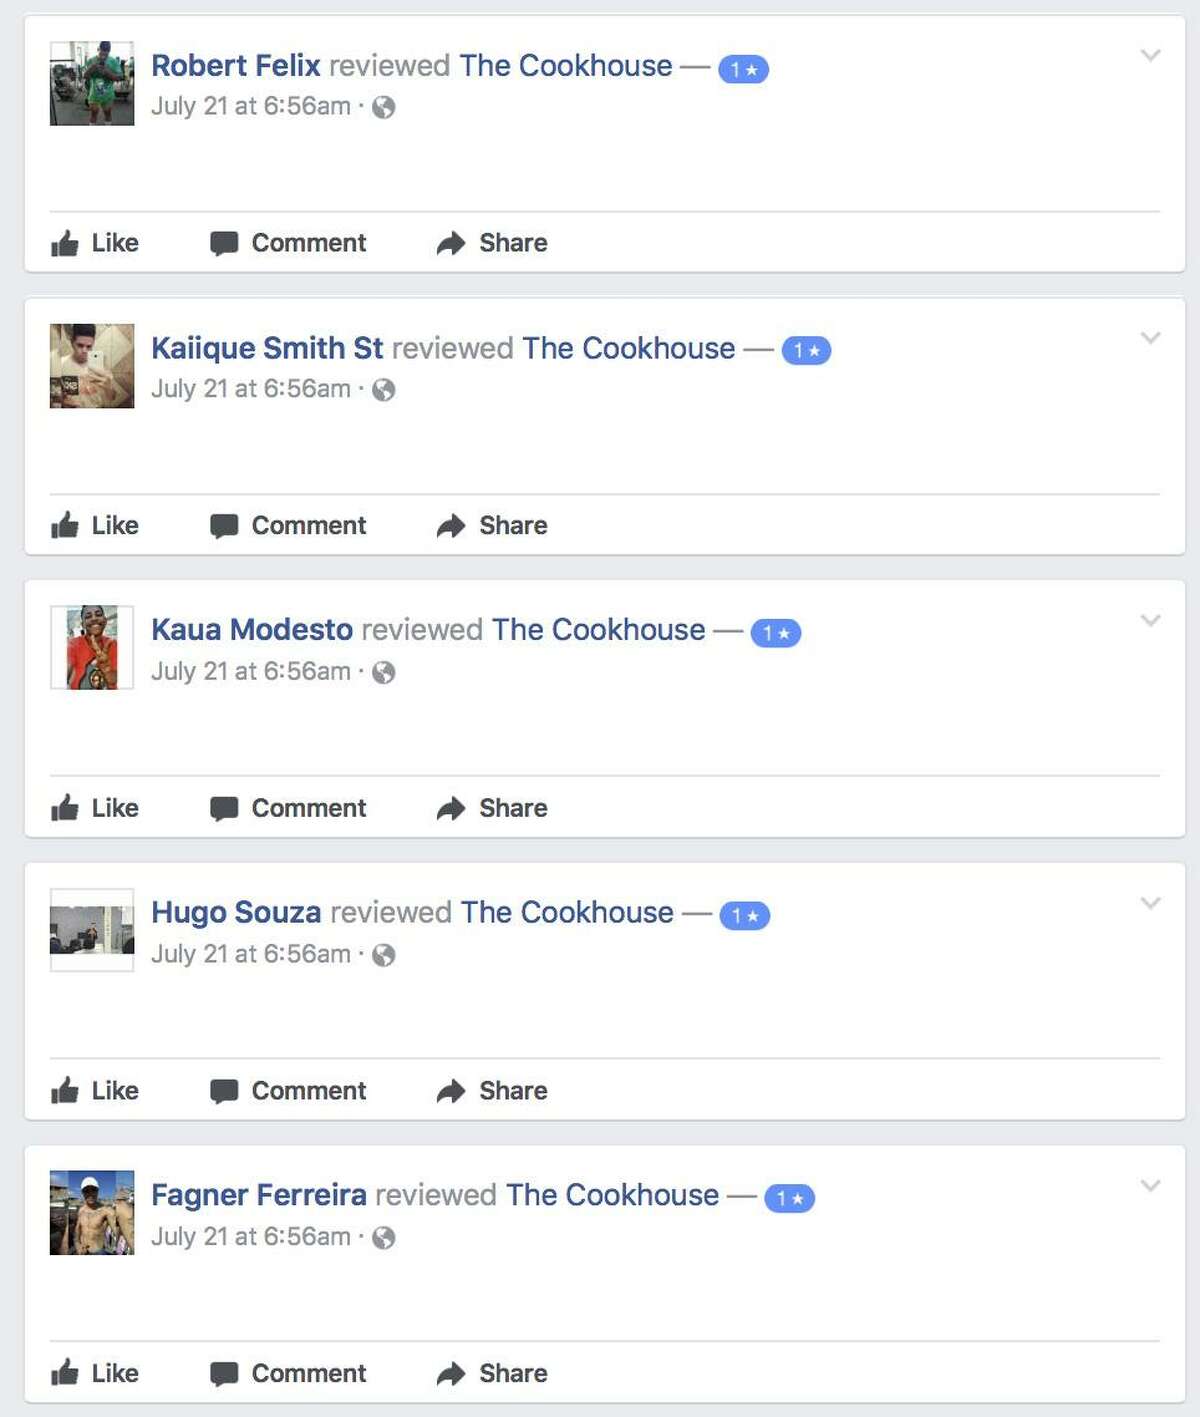 A string of 1-star reviews left on the Facebook page of The Cookhouse at 6:56 a.m. July 21.